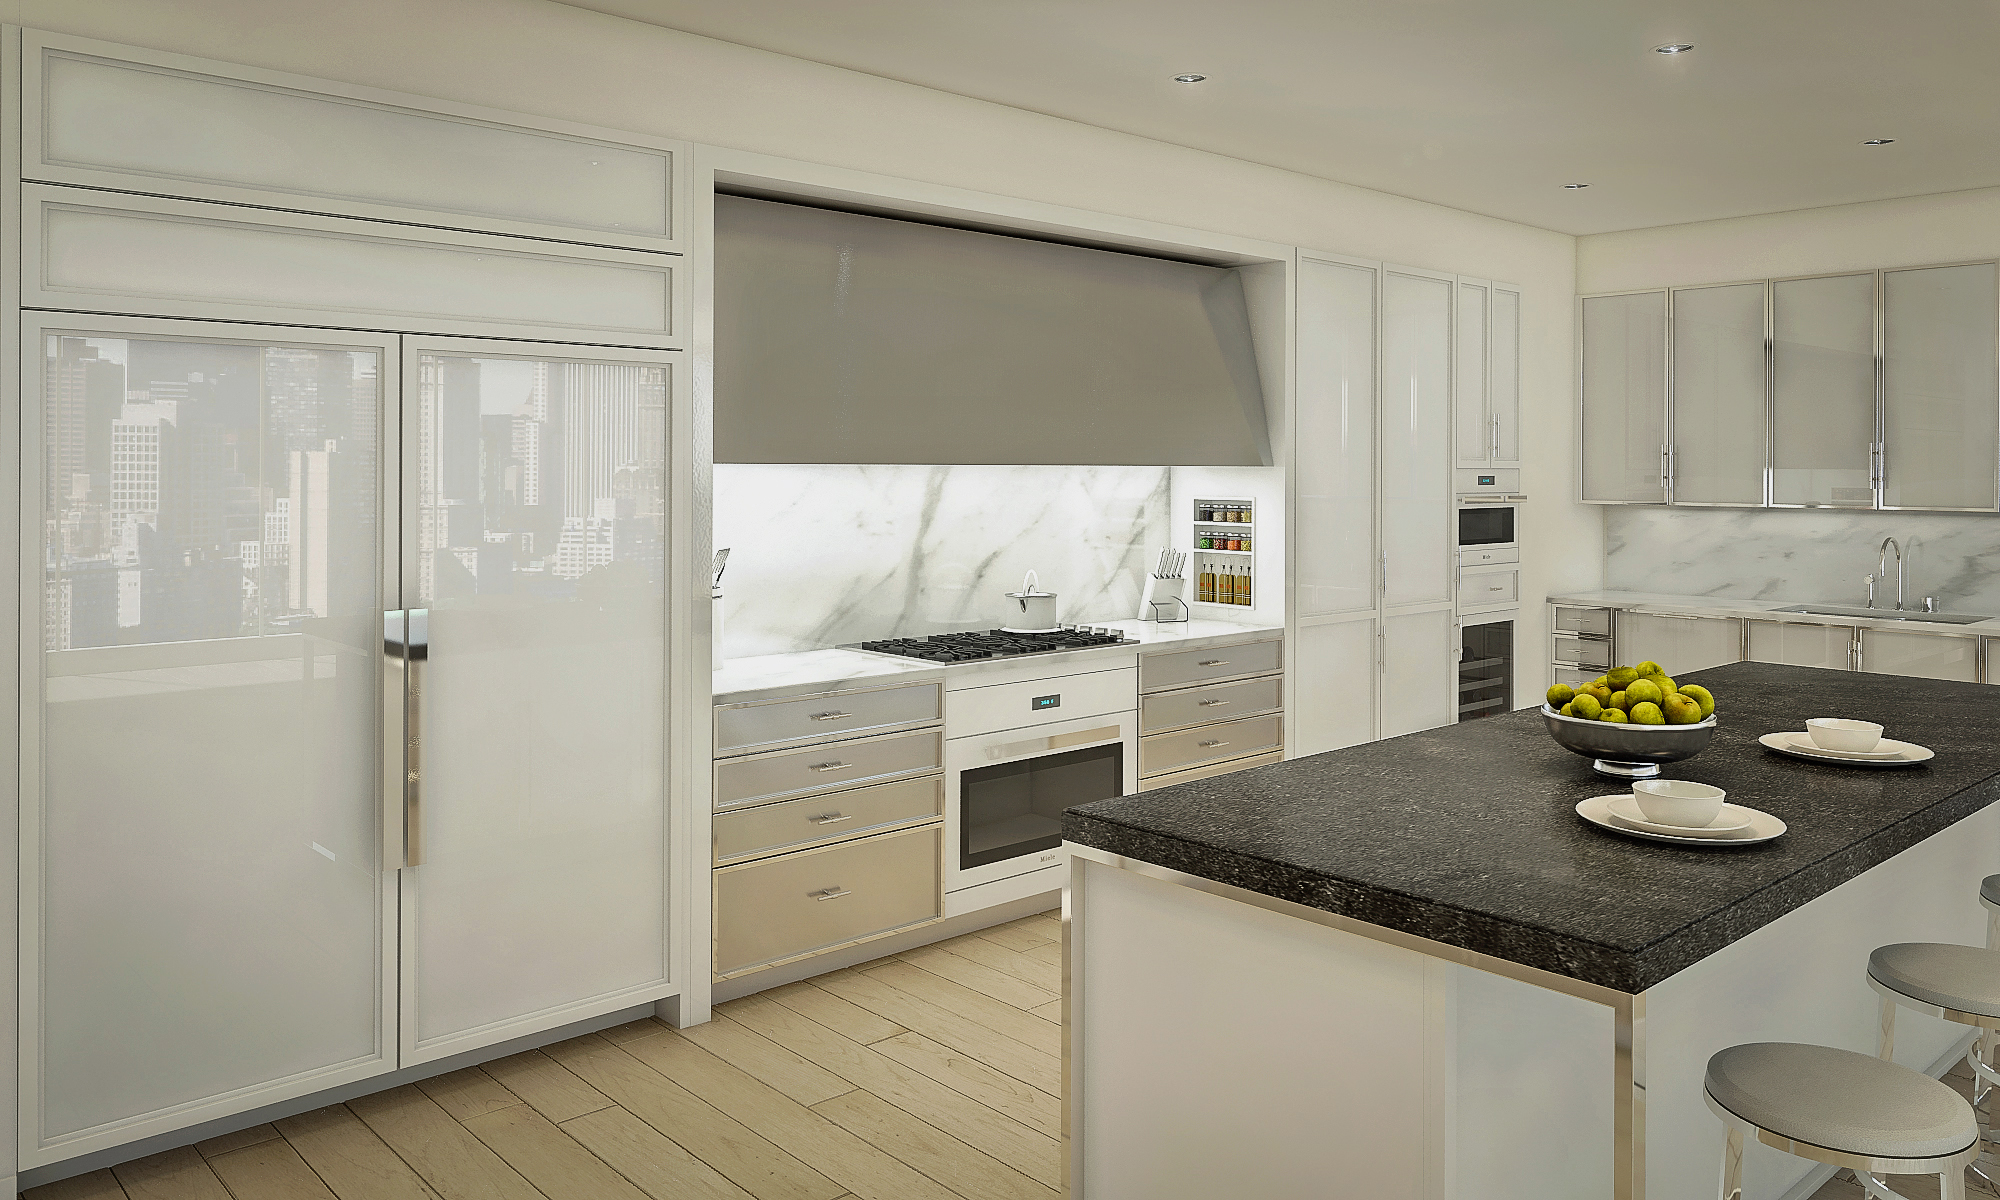 ARCHITECTURAL IMAGERY_IRP KITCHENS_03.jpg